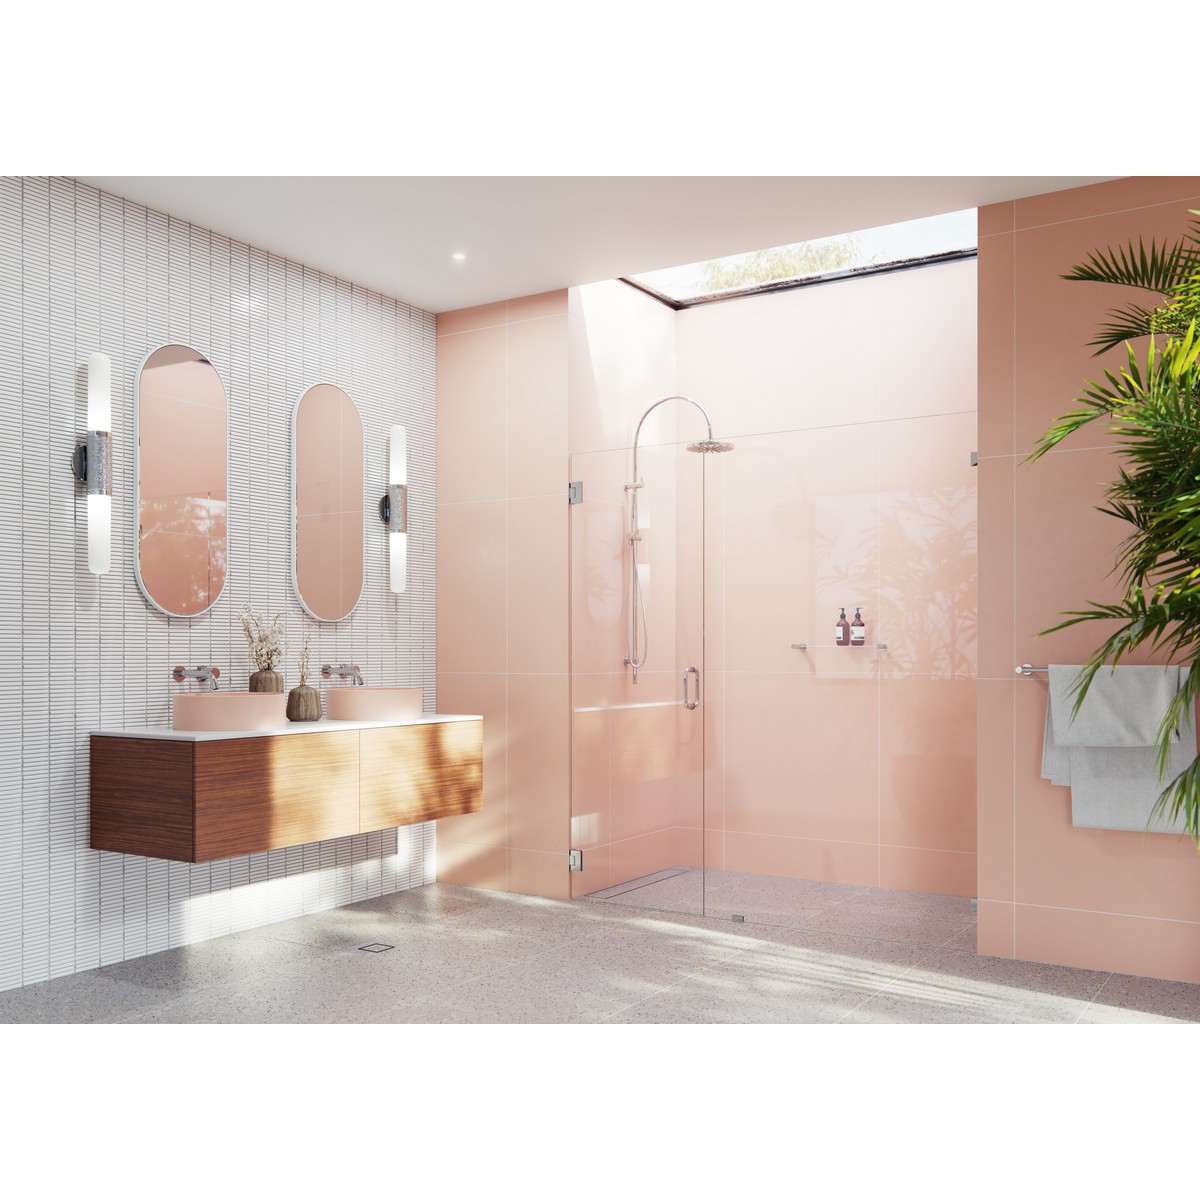 GLASS WAREHOUSE GW-WH-70.75 ILLUME 70 3/4 W X 78 H WALL HINGED FULLY FRAMELESS GLASS SHOWER ENCLOSURE